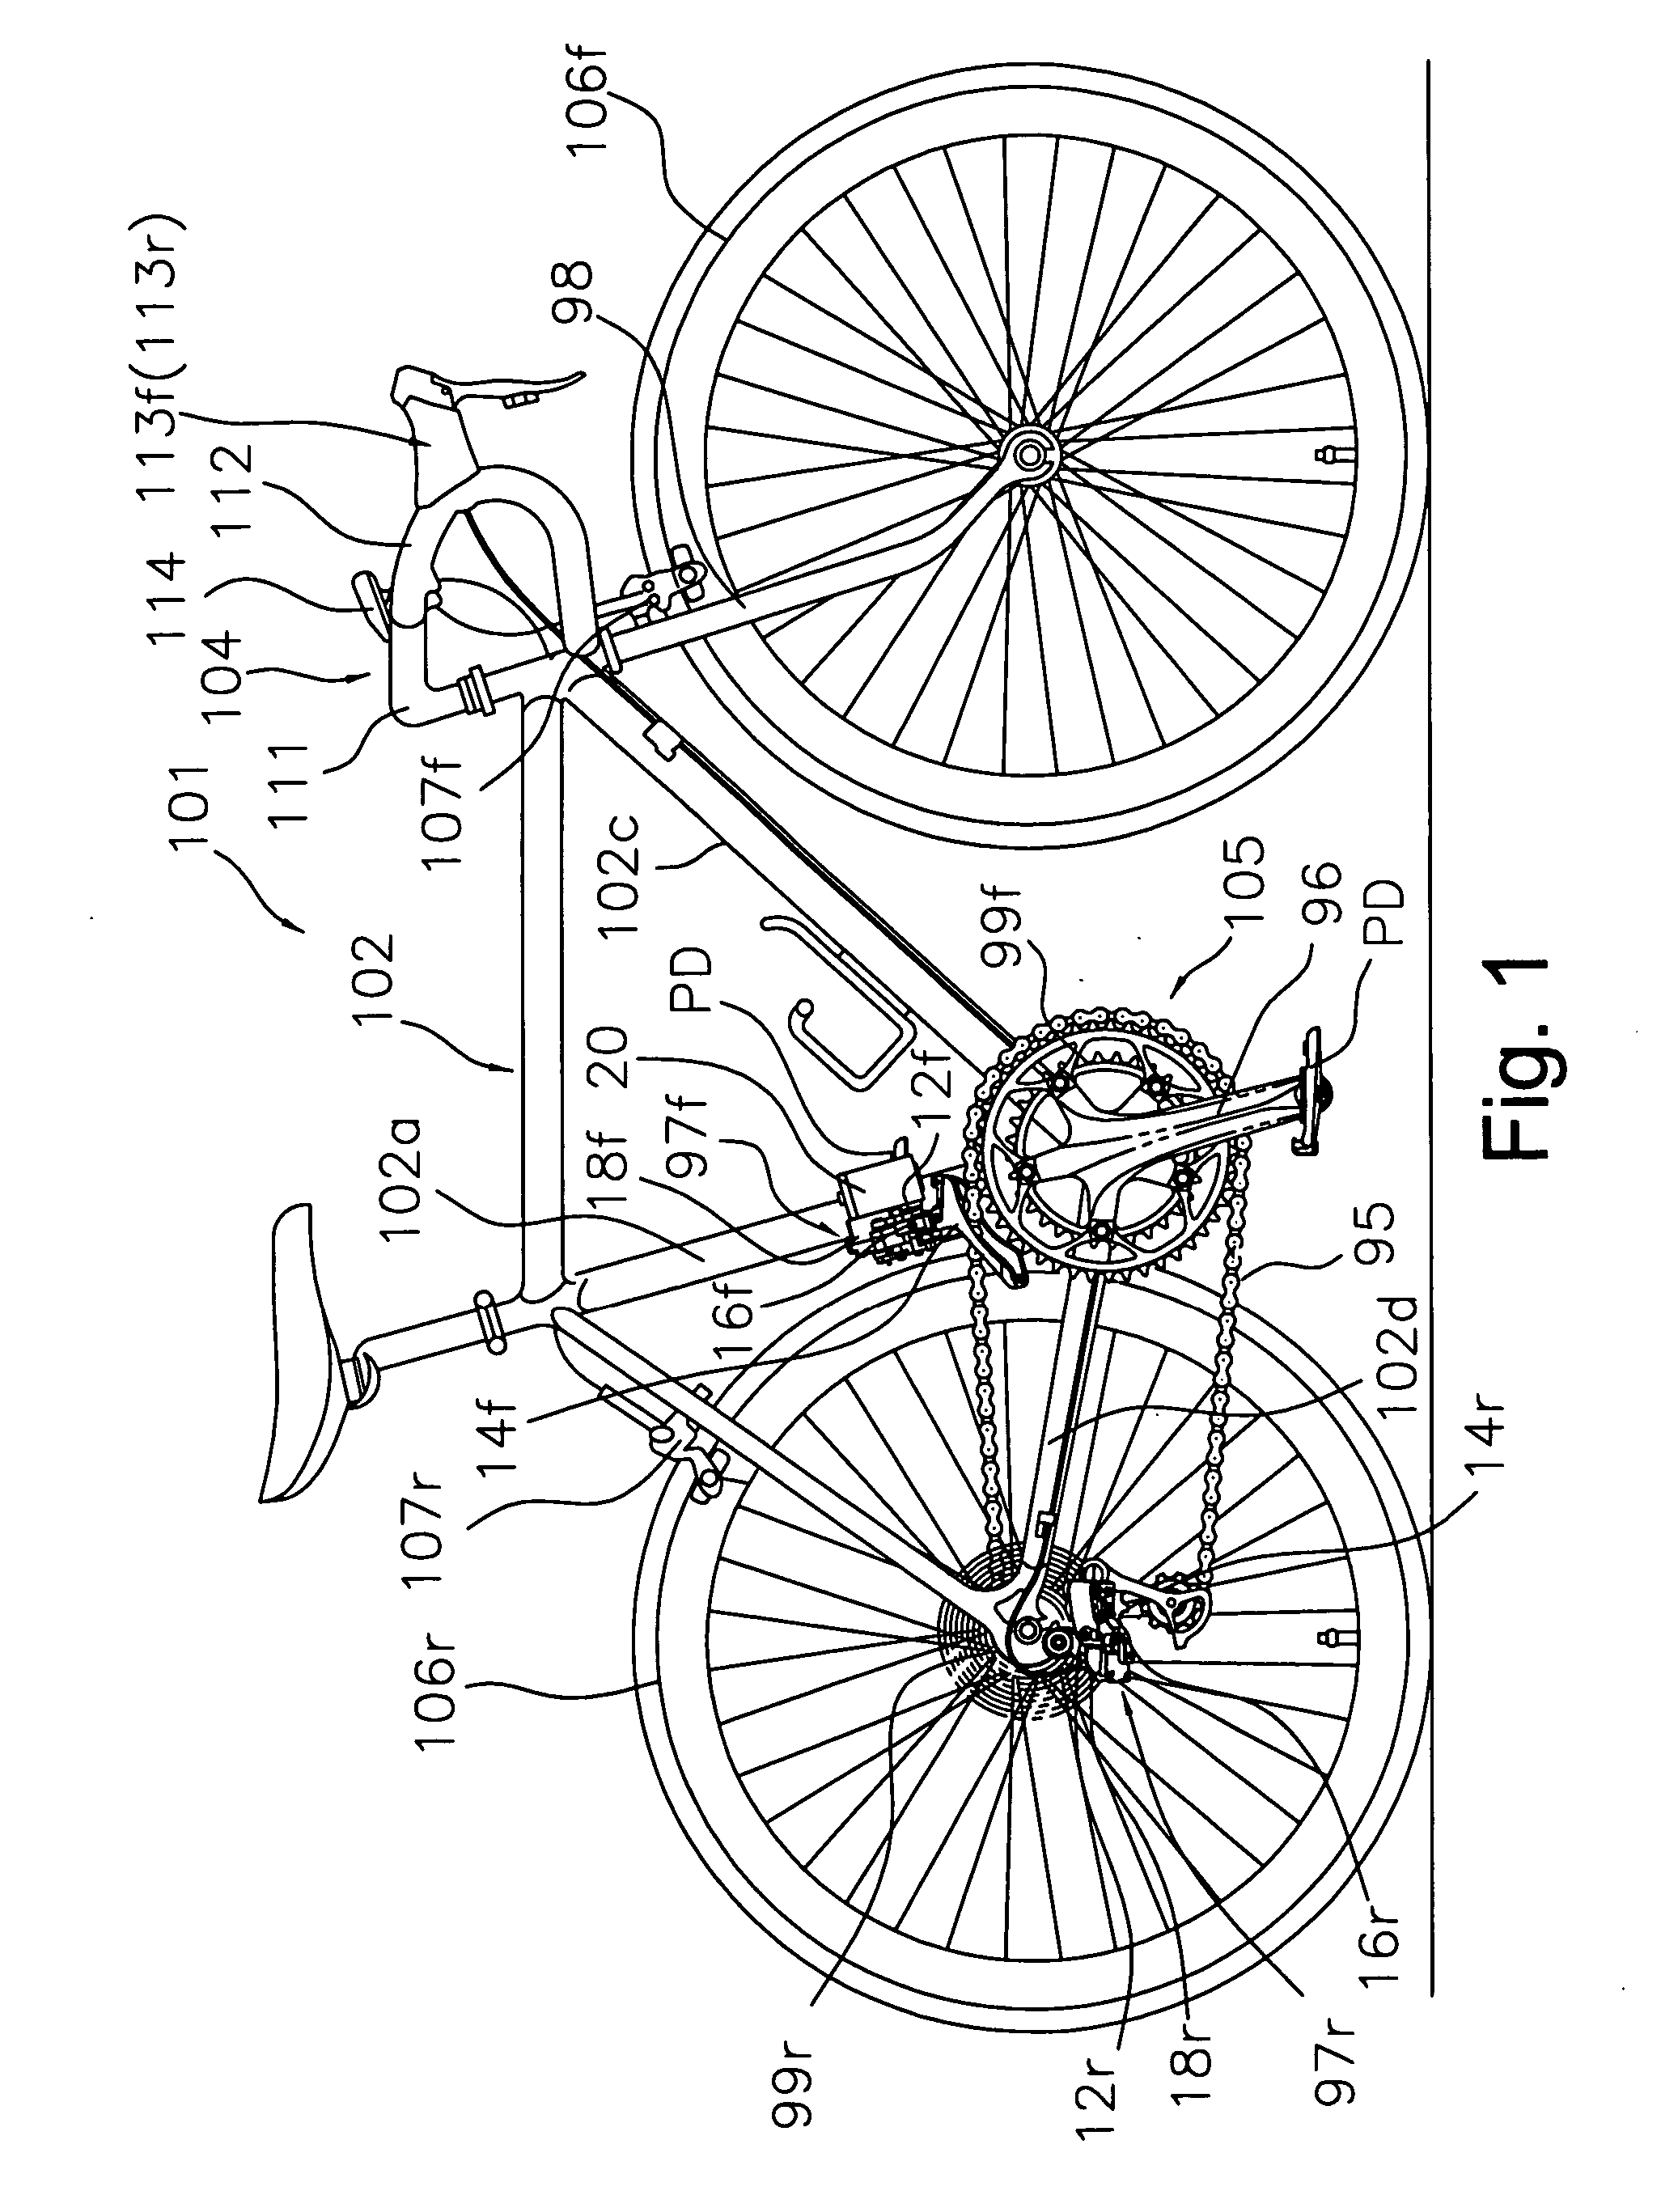 Bicycle display device